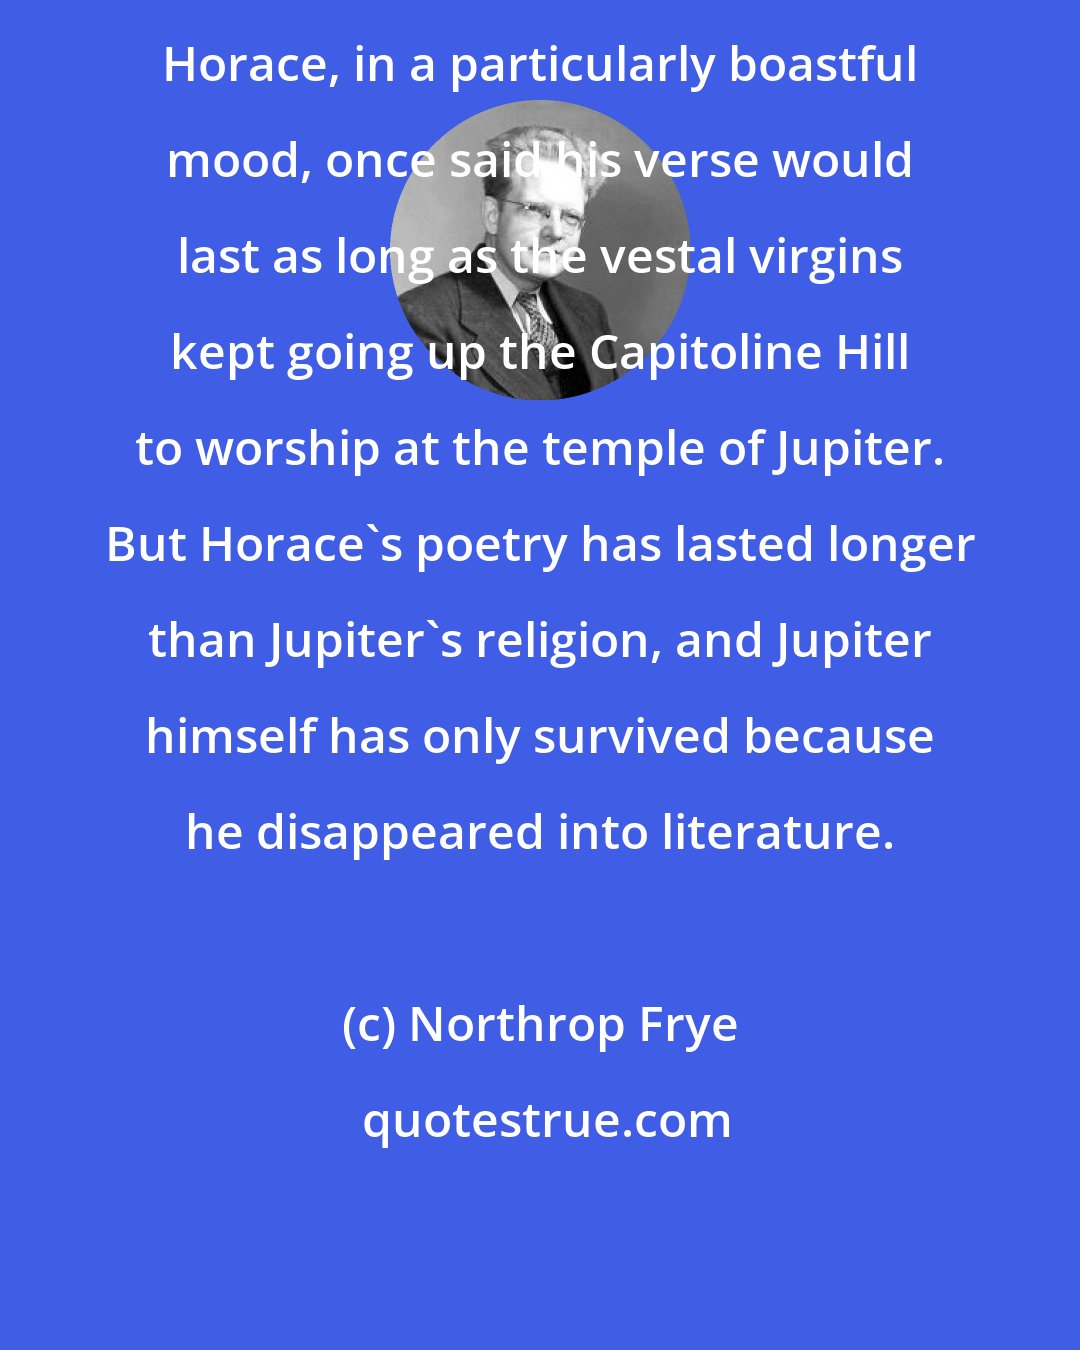 Northrop Frye: Horace, in a particularly boastful mood, once said his verse would last as long as the vestal virgins kept going up the Capitoline Hill to worship at the temple of Jupiter. But Horace's poetry has lasted longer than Jupiter's religion, and Jupiter himself has only survived because he disappeared into literature.